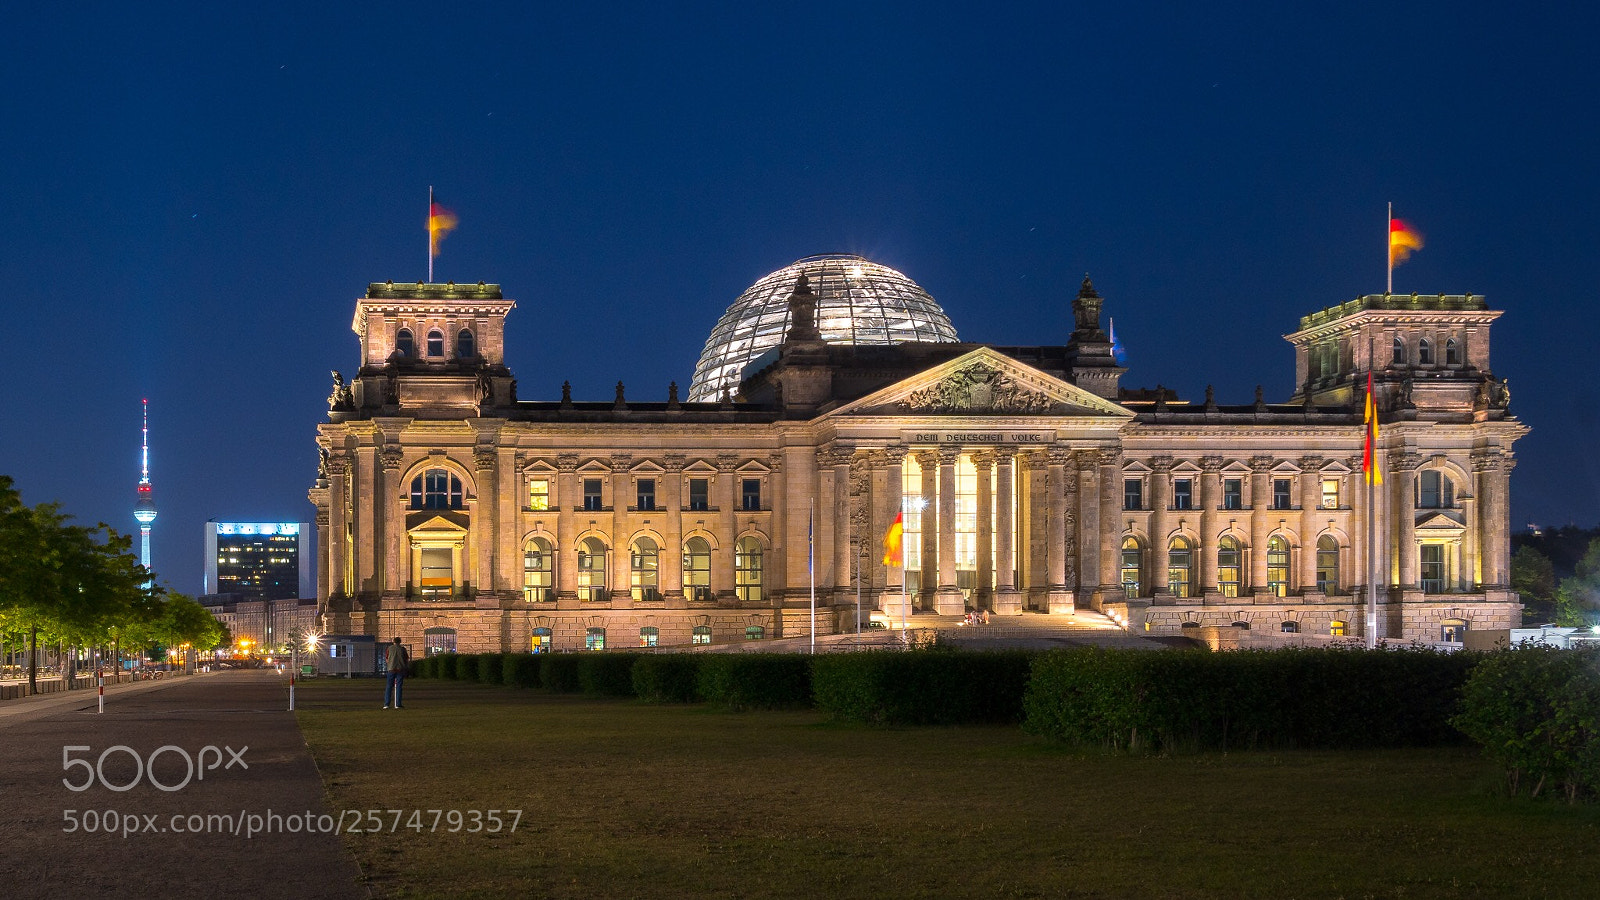 Sony a6300 sample photo. Reichstag photography